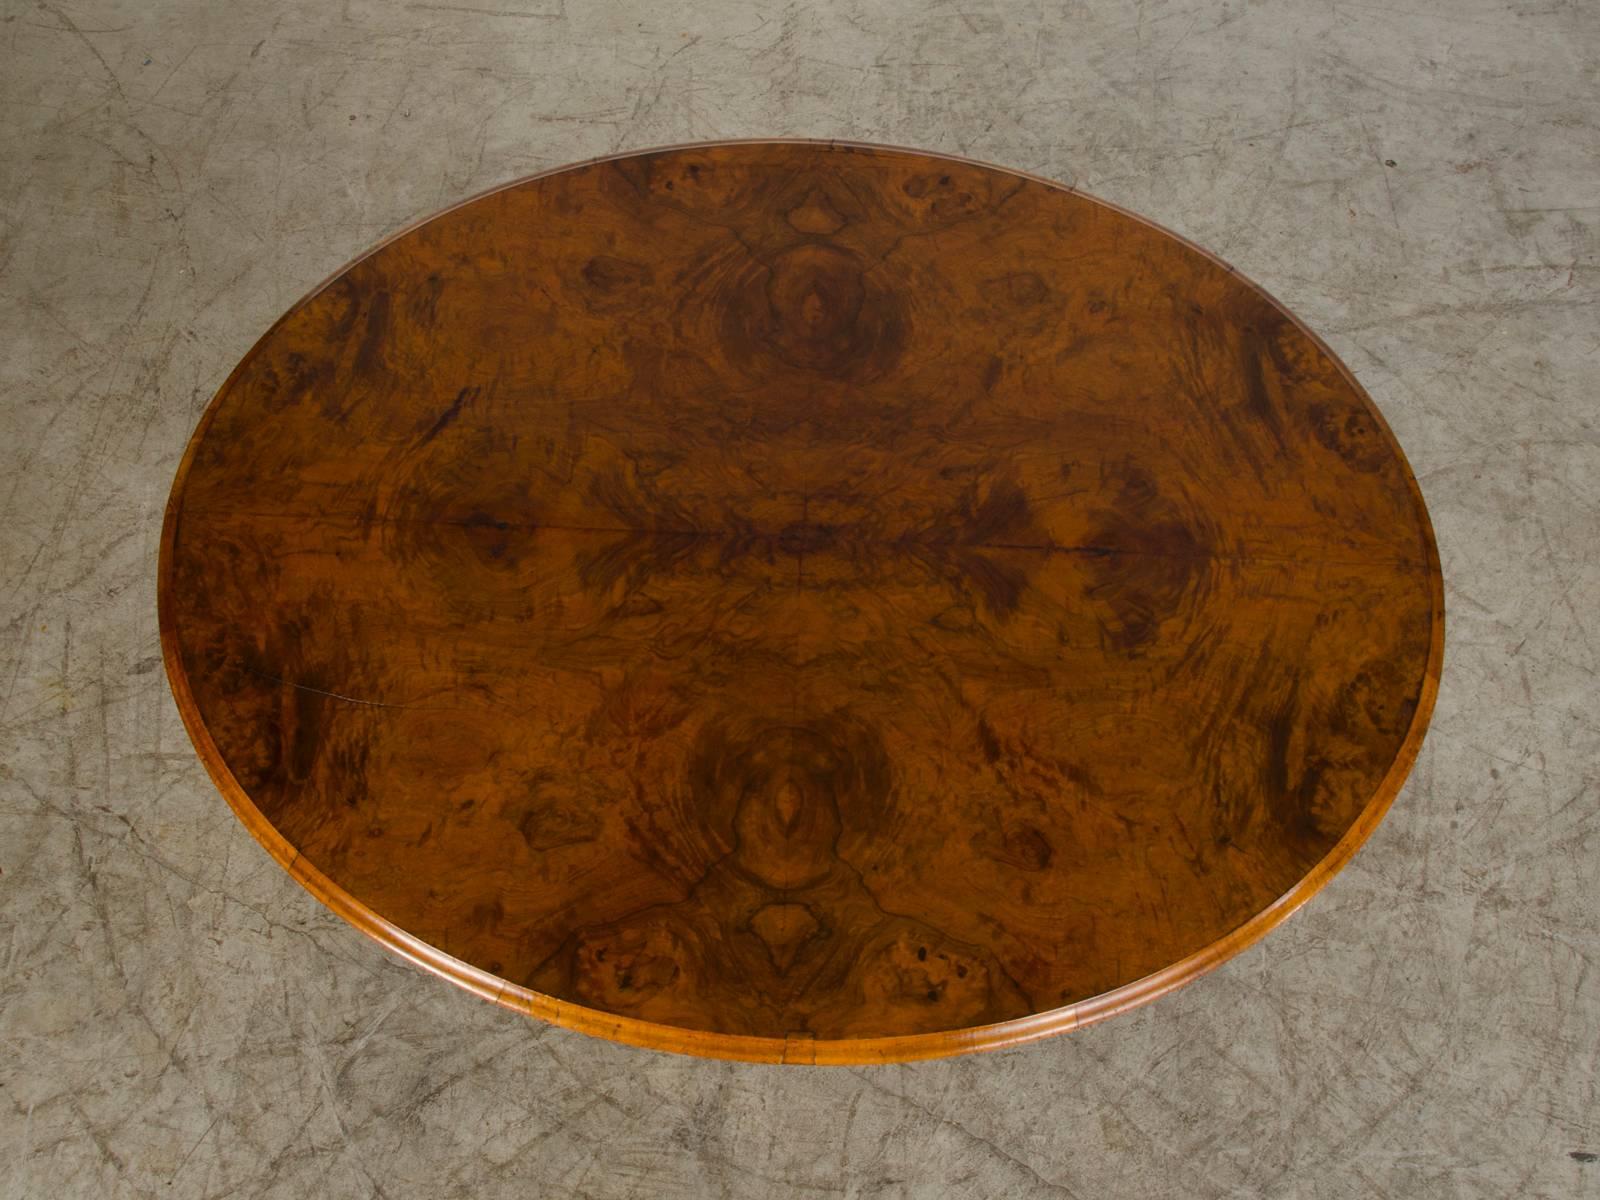 A gorgeous burl walnut tilt top table with an oval edge standing on a pedestal base from England, circa 1865. This table was originally placed in a drawing room or library where its ability to be easily moved where it was needed and the ease in